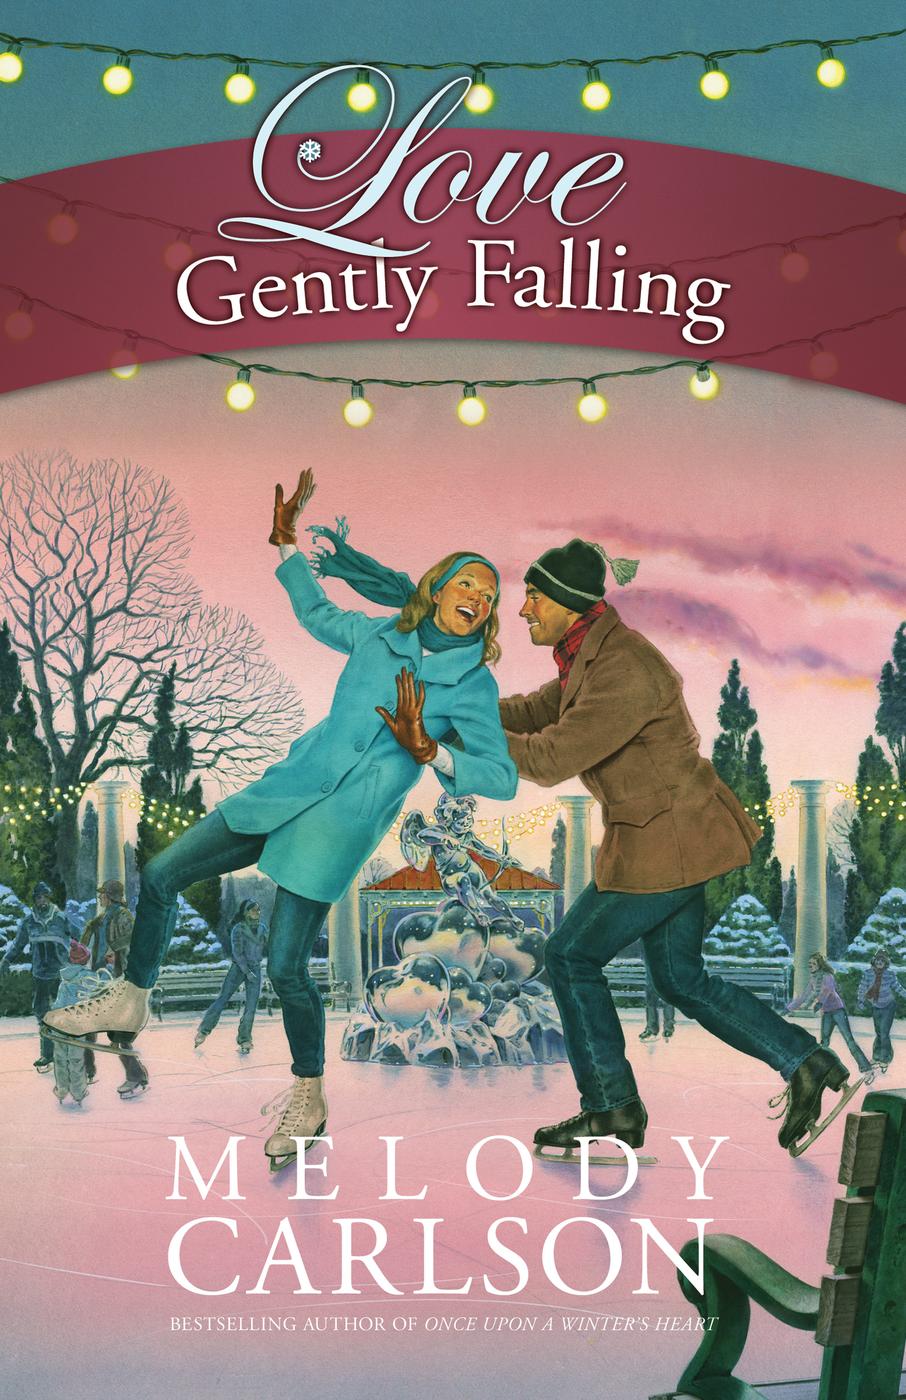 Love Gently Falling (2015) by Melody Carlson